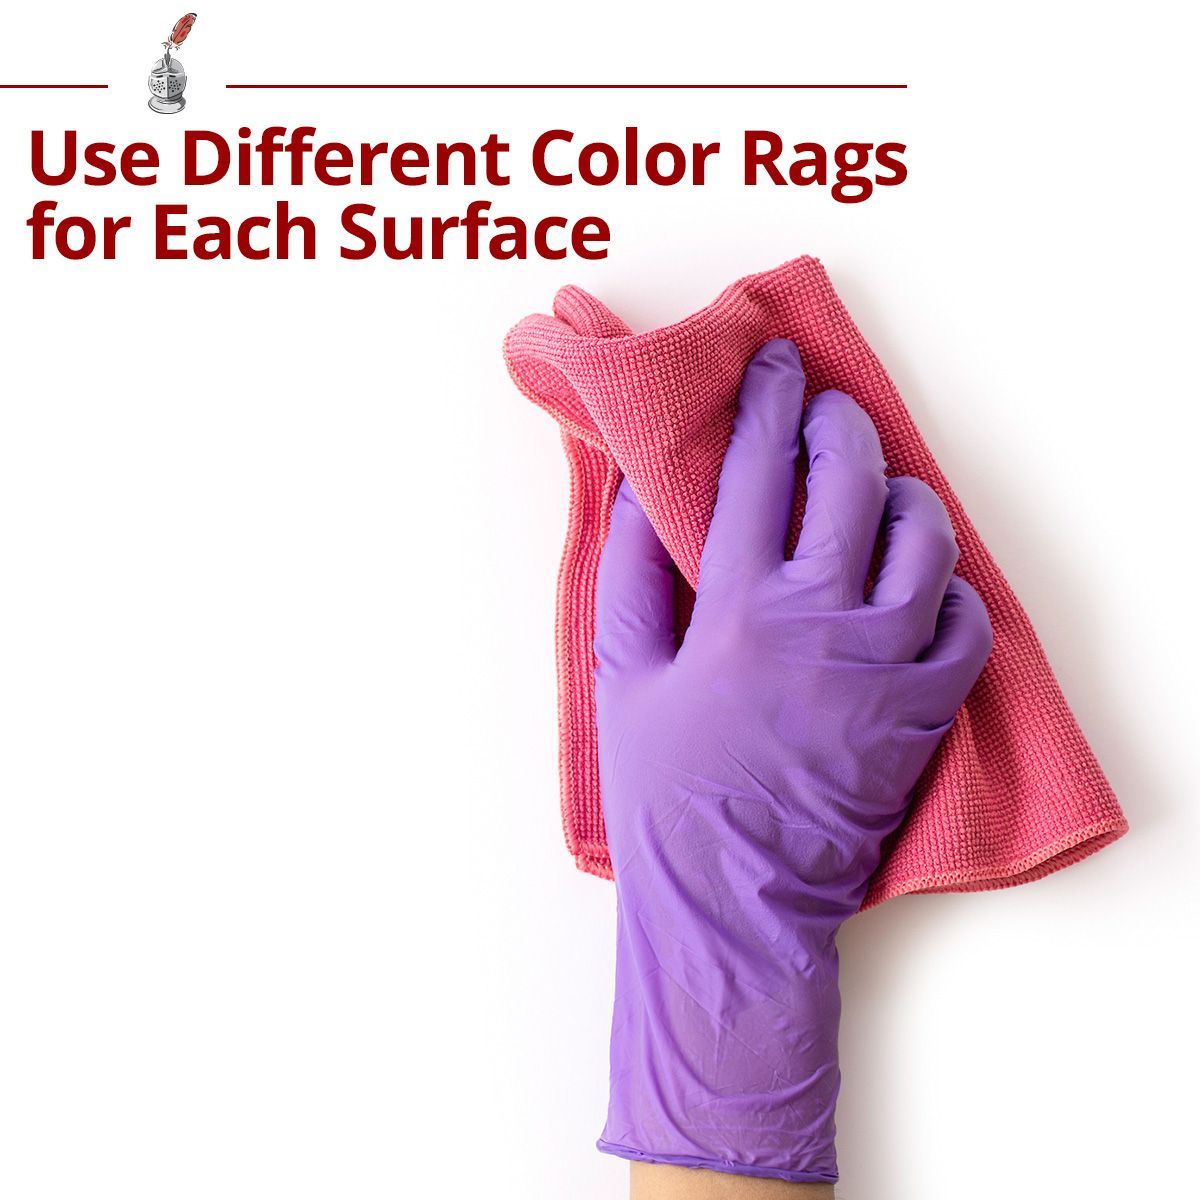 Use Different Color Rags for Each Surface